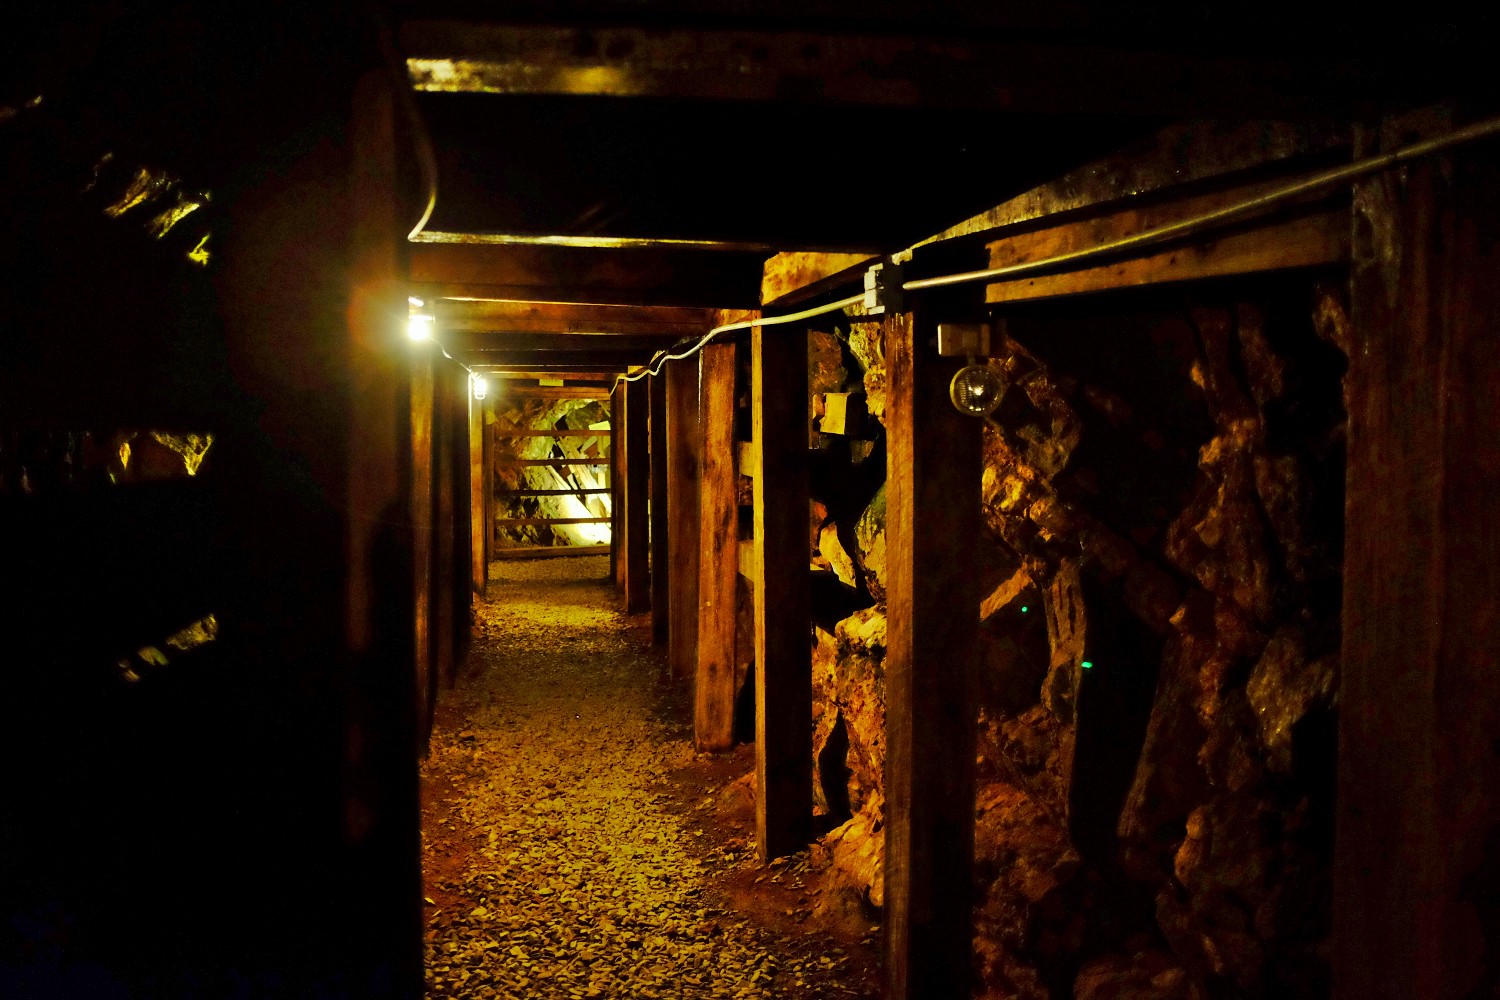 Photograph of the inside of the Reed Gold Mine in North Carolina.